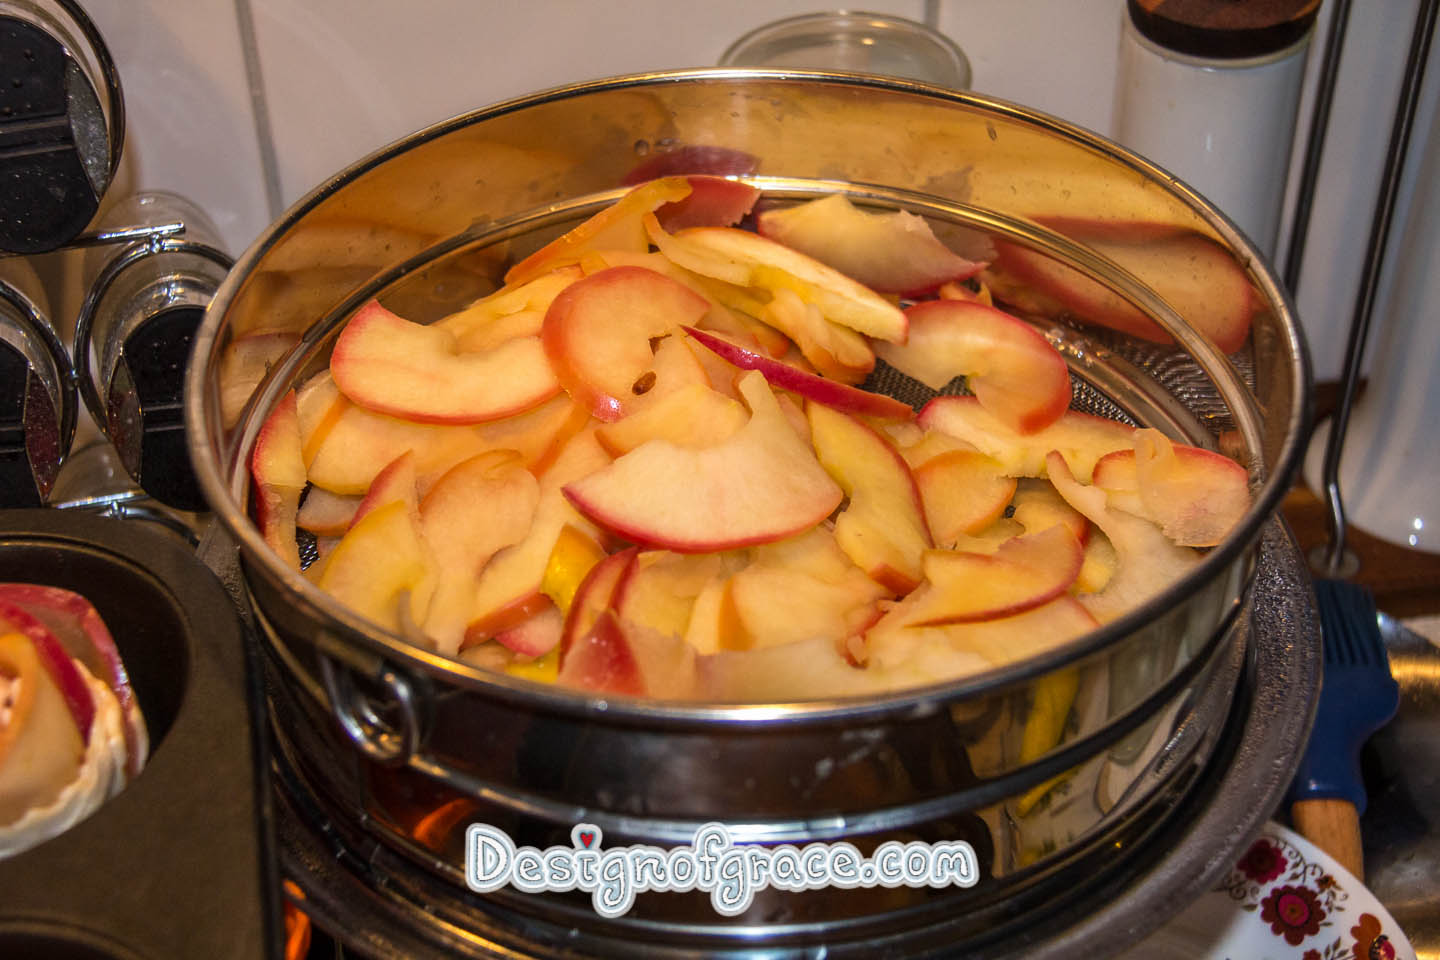 Apple sliced and cooked in sugar water